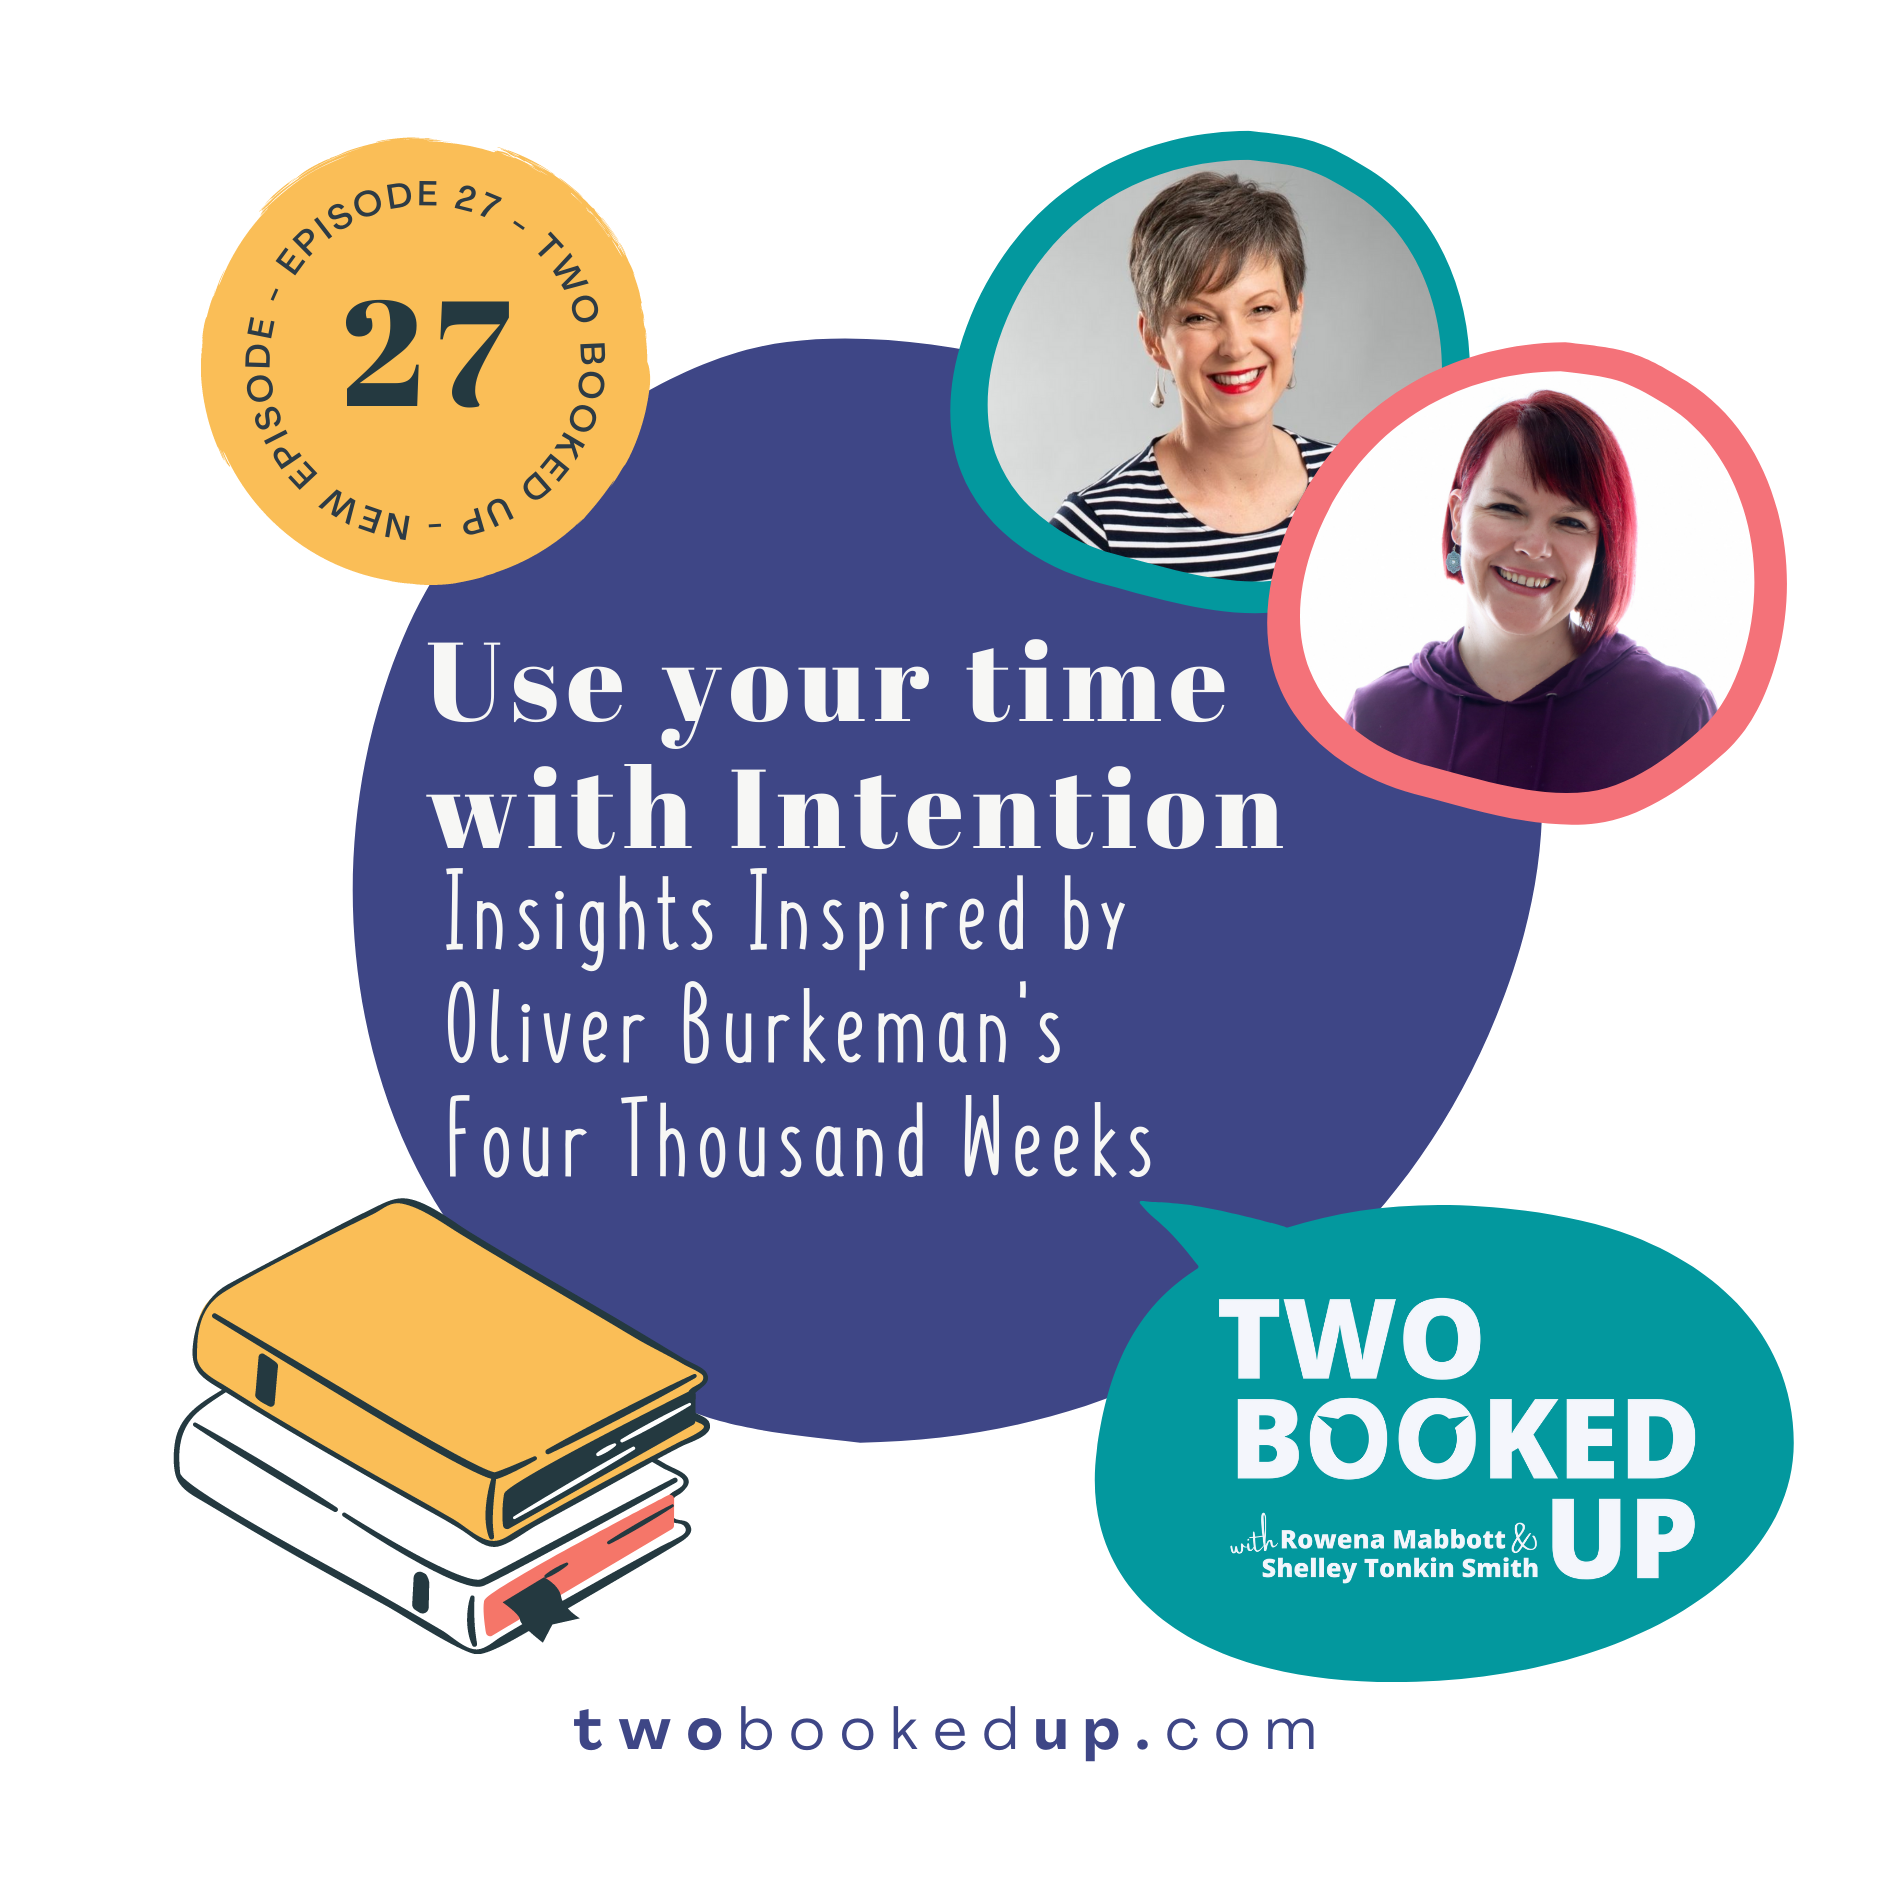 How to use your time with Intention: Insights from Oliver Burkeman’s Four Thousand Weeks